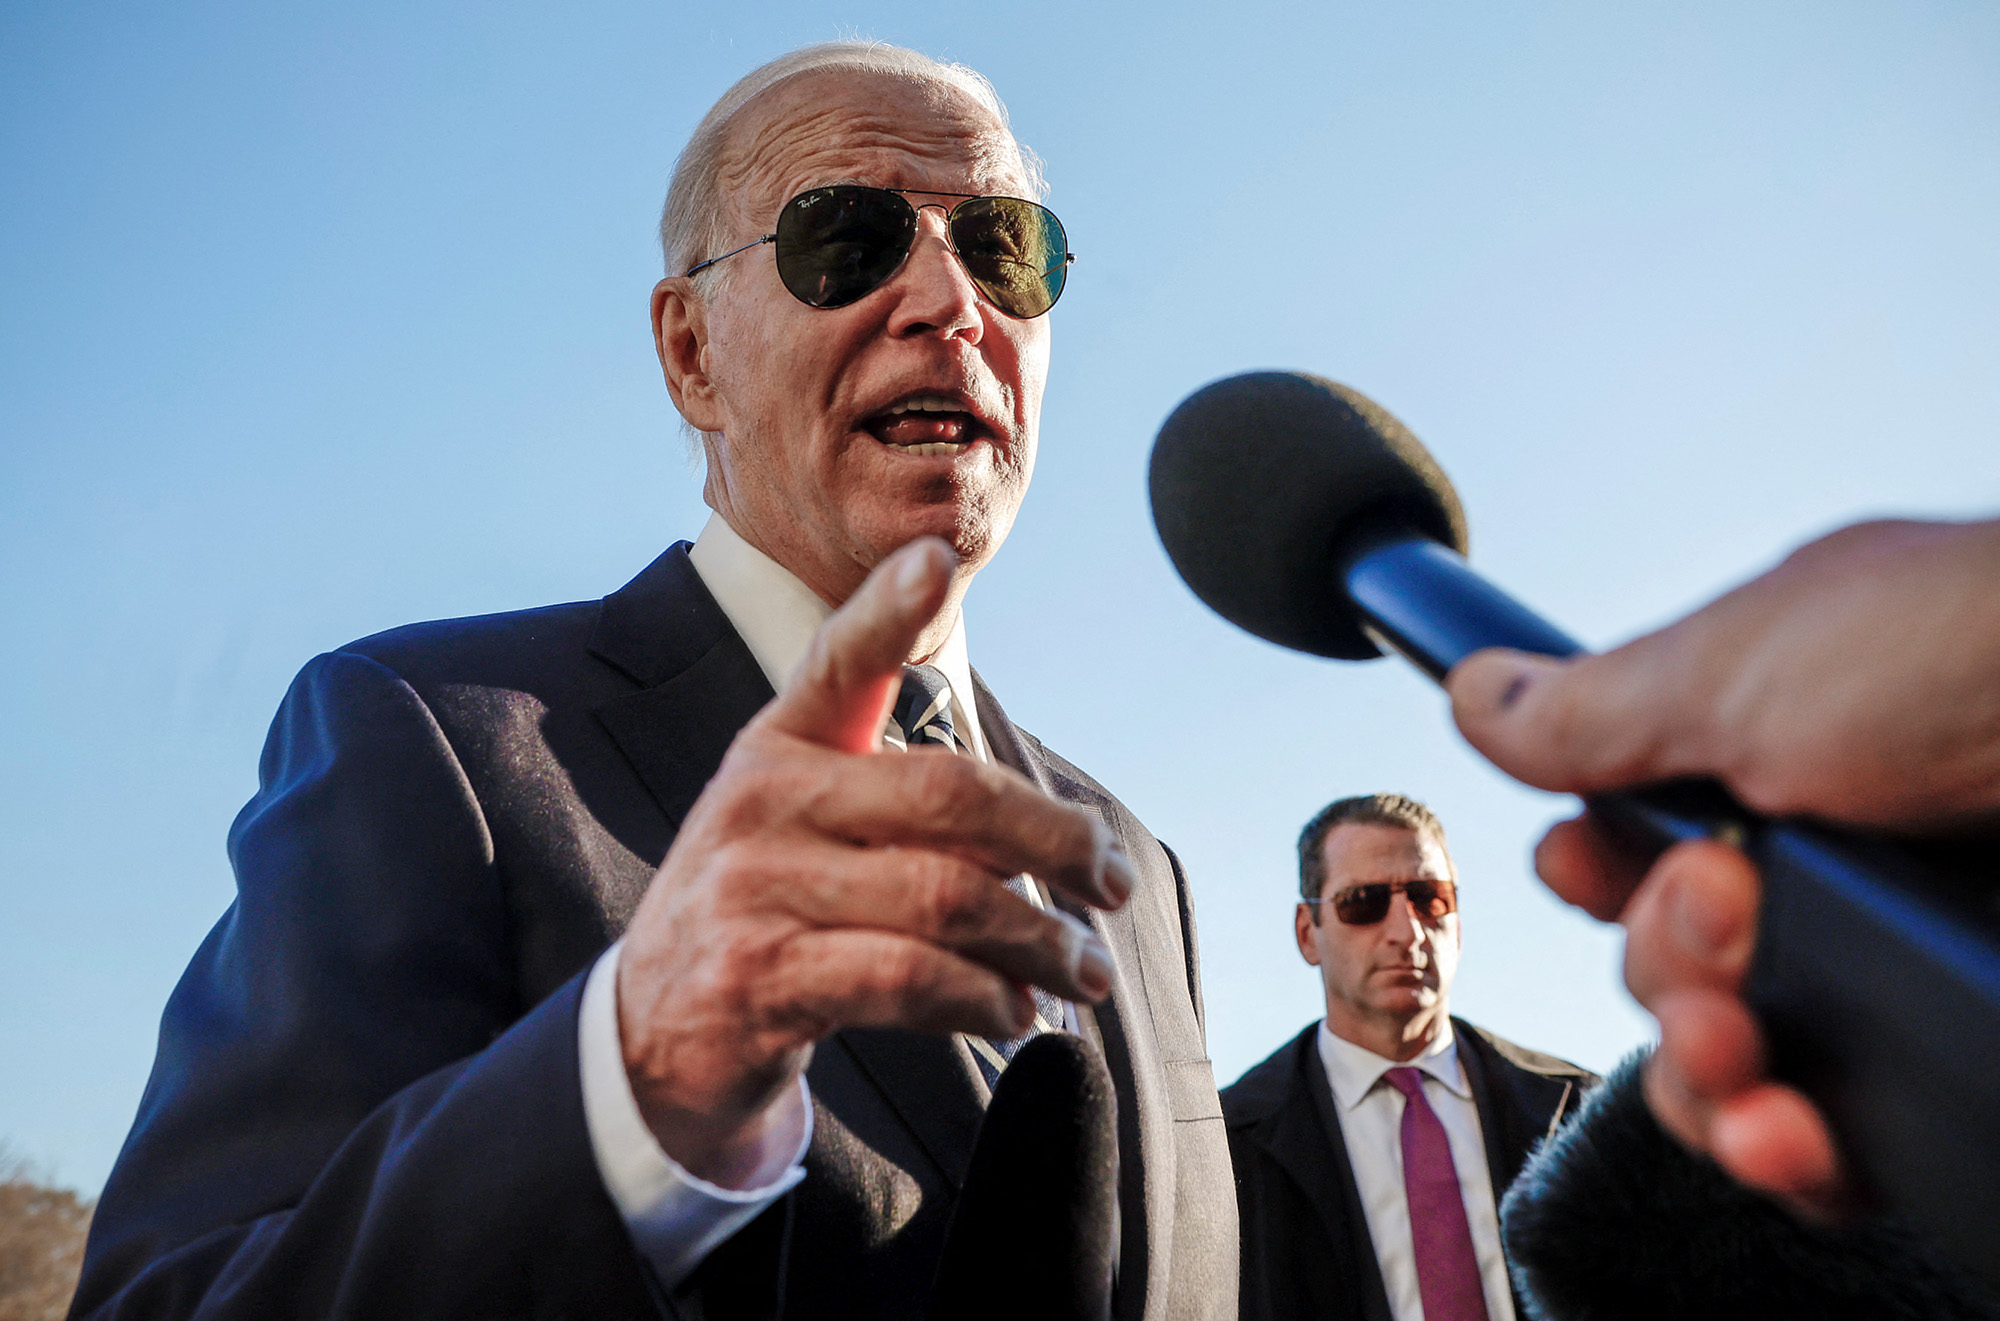 U.S. President Joe Biden speaks to the media after his arrival to the White House in Washington, U.S., on January 30.